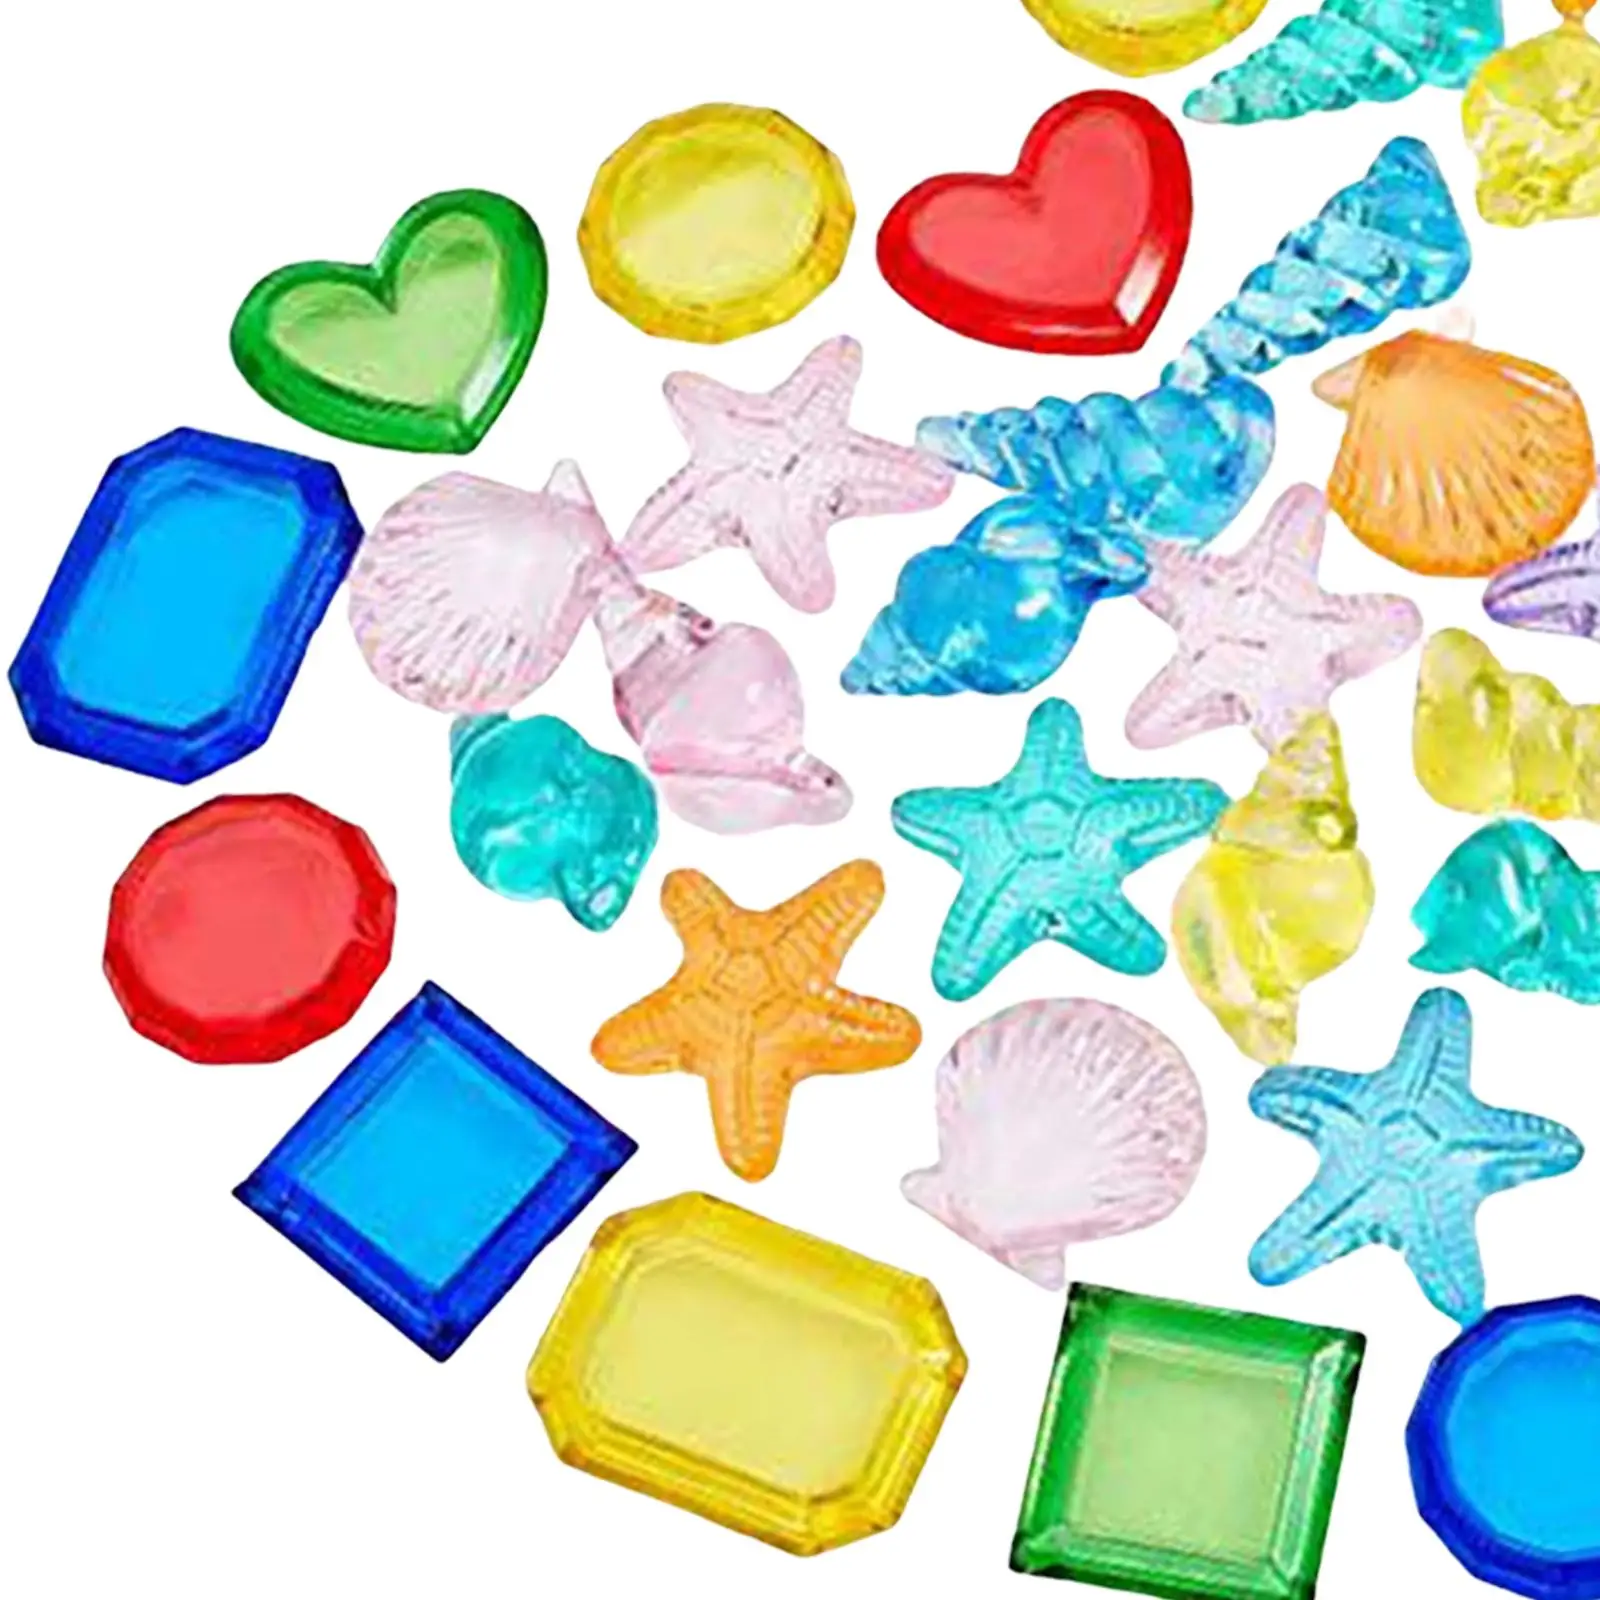 Multipurpose Diving Toy Gifts Motor Skill Game Acrylic Sensory Toys Cognitive for Family Activity Parties Adults Kids Girls Boys